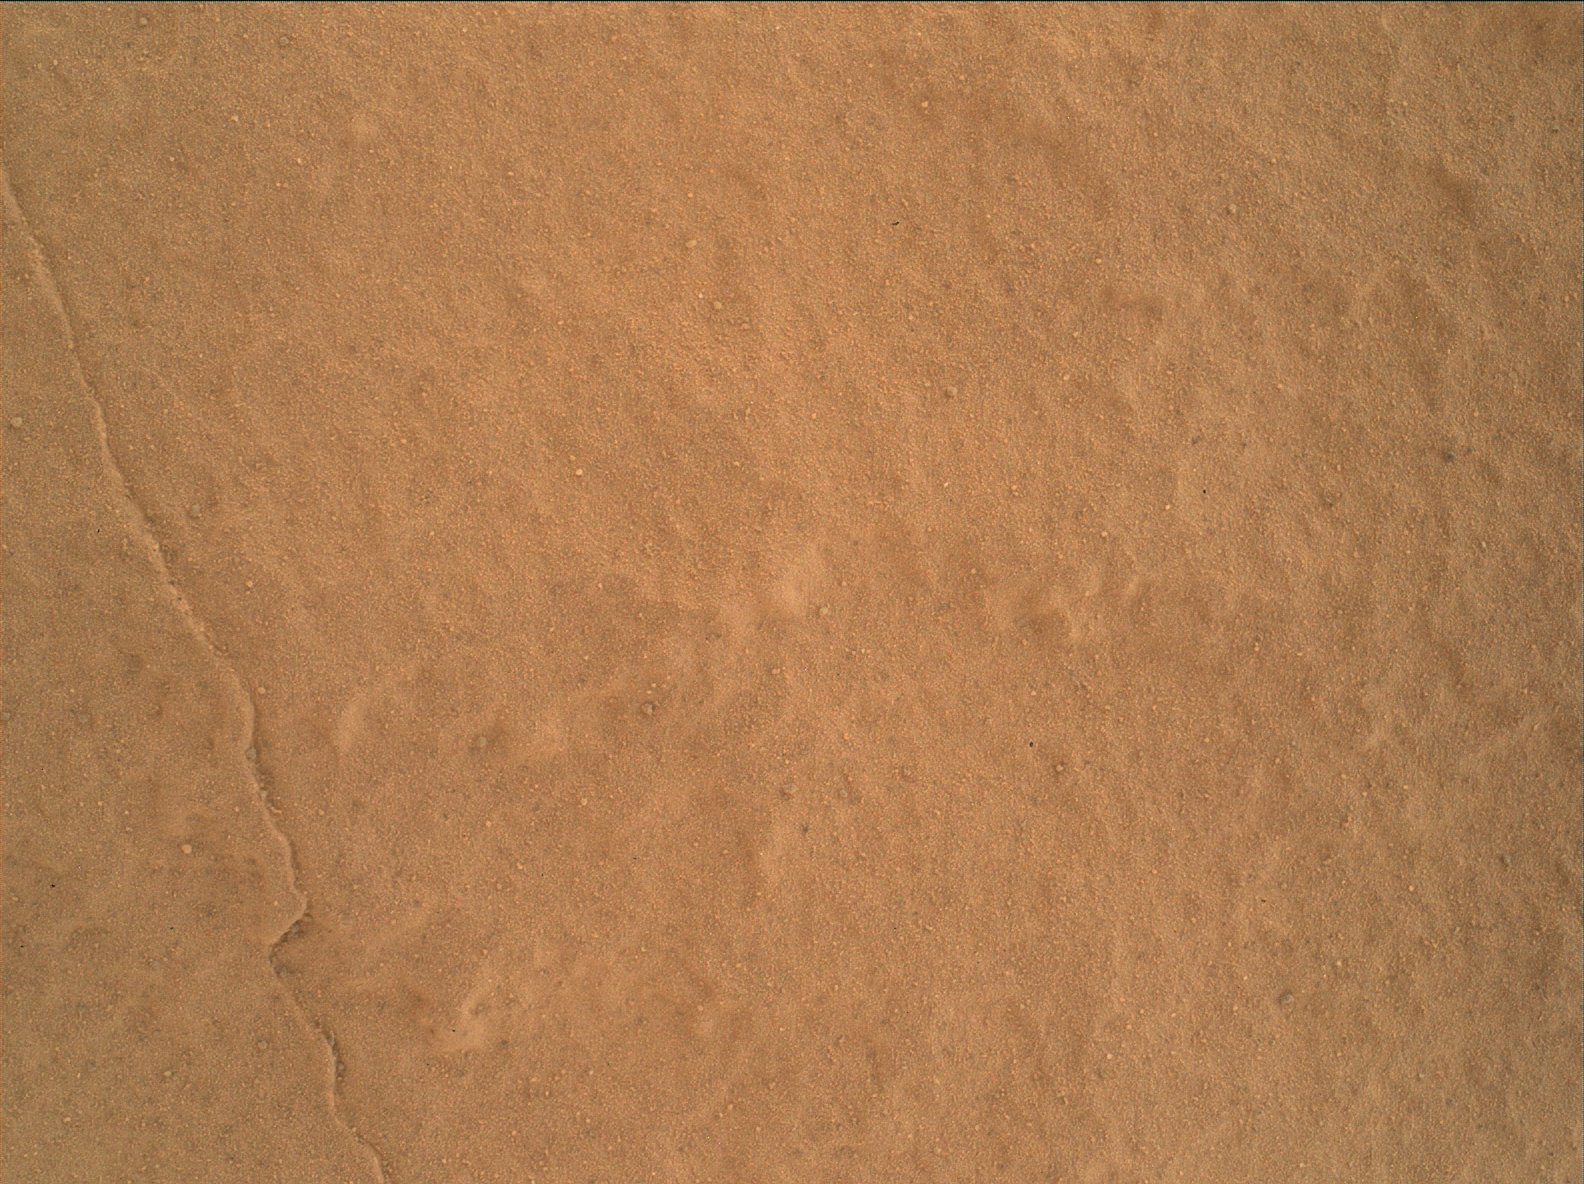 Nasa's Mars rover Curiosity acquired this image using its Mars Hand Lens Imager (MAHLI) on Sol 1833